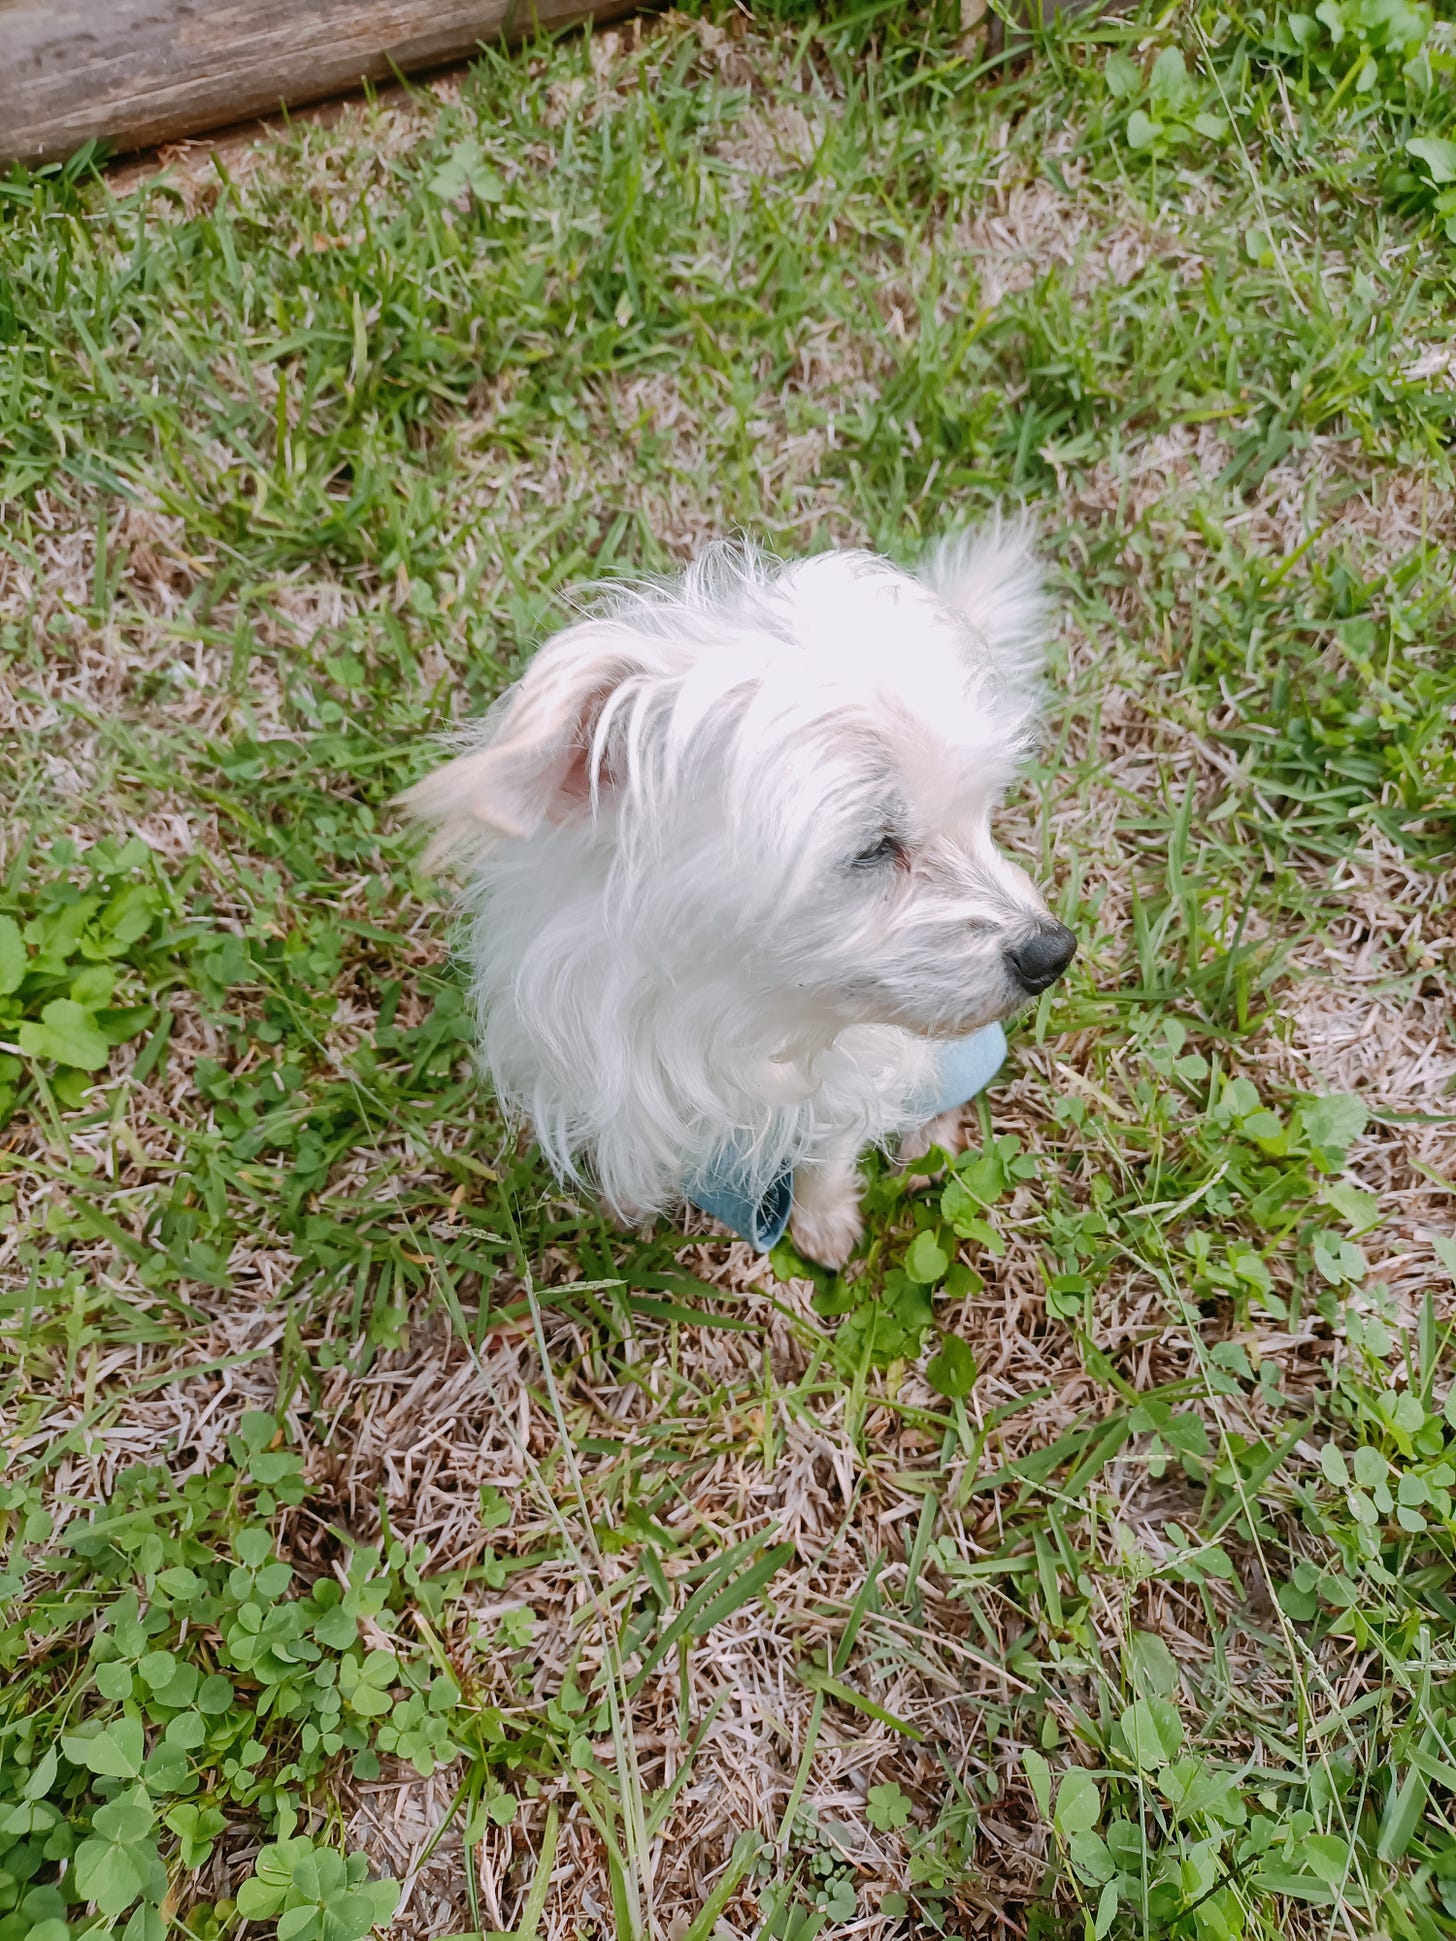 An overhead shot of Donut, a puppy-sized Maltese mix with long white fur wearing some light blue overalls. He's looking to the side, squinting in the sunlight.